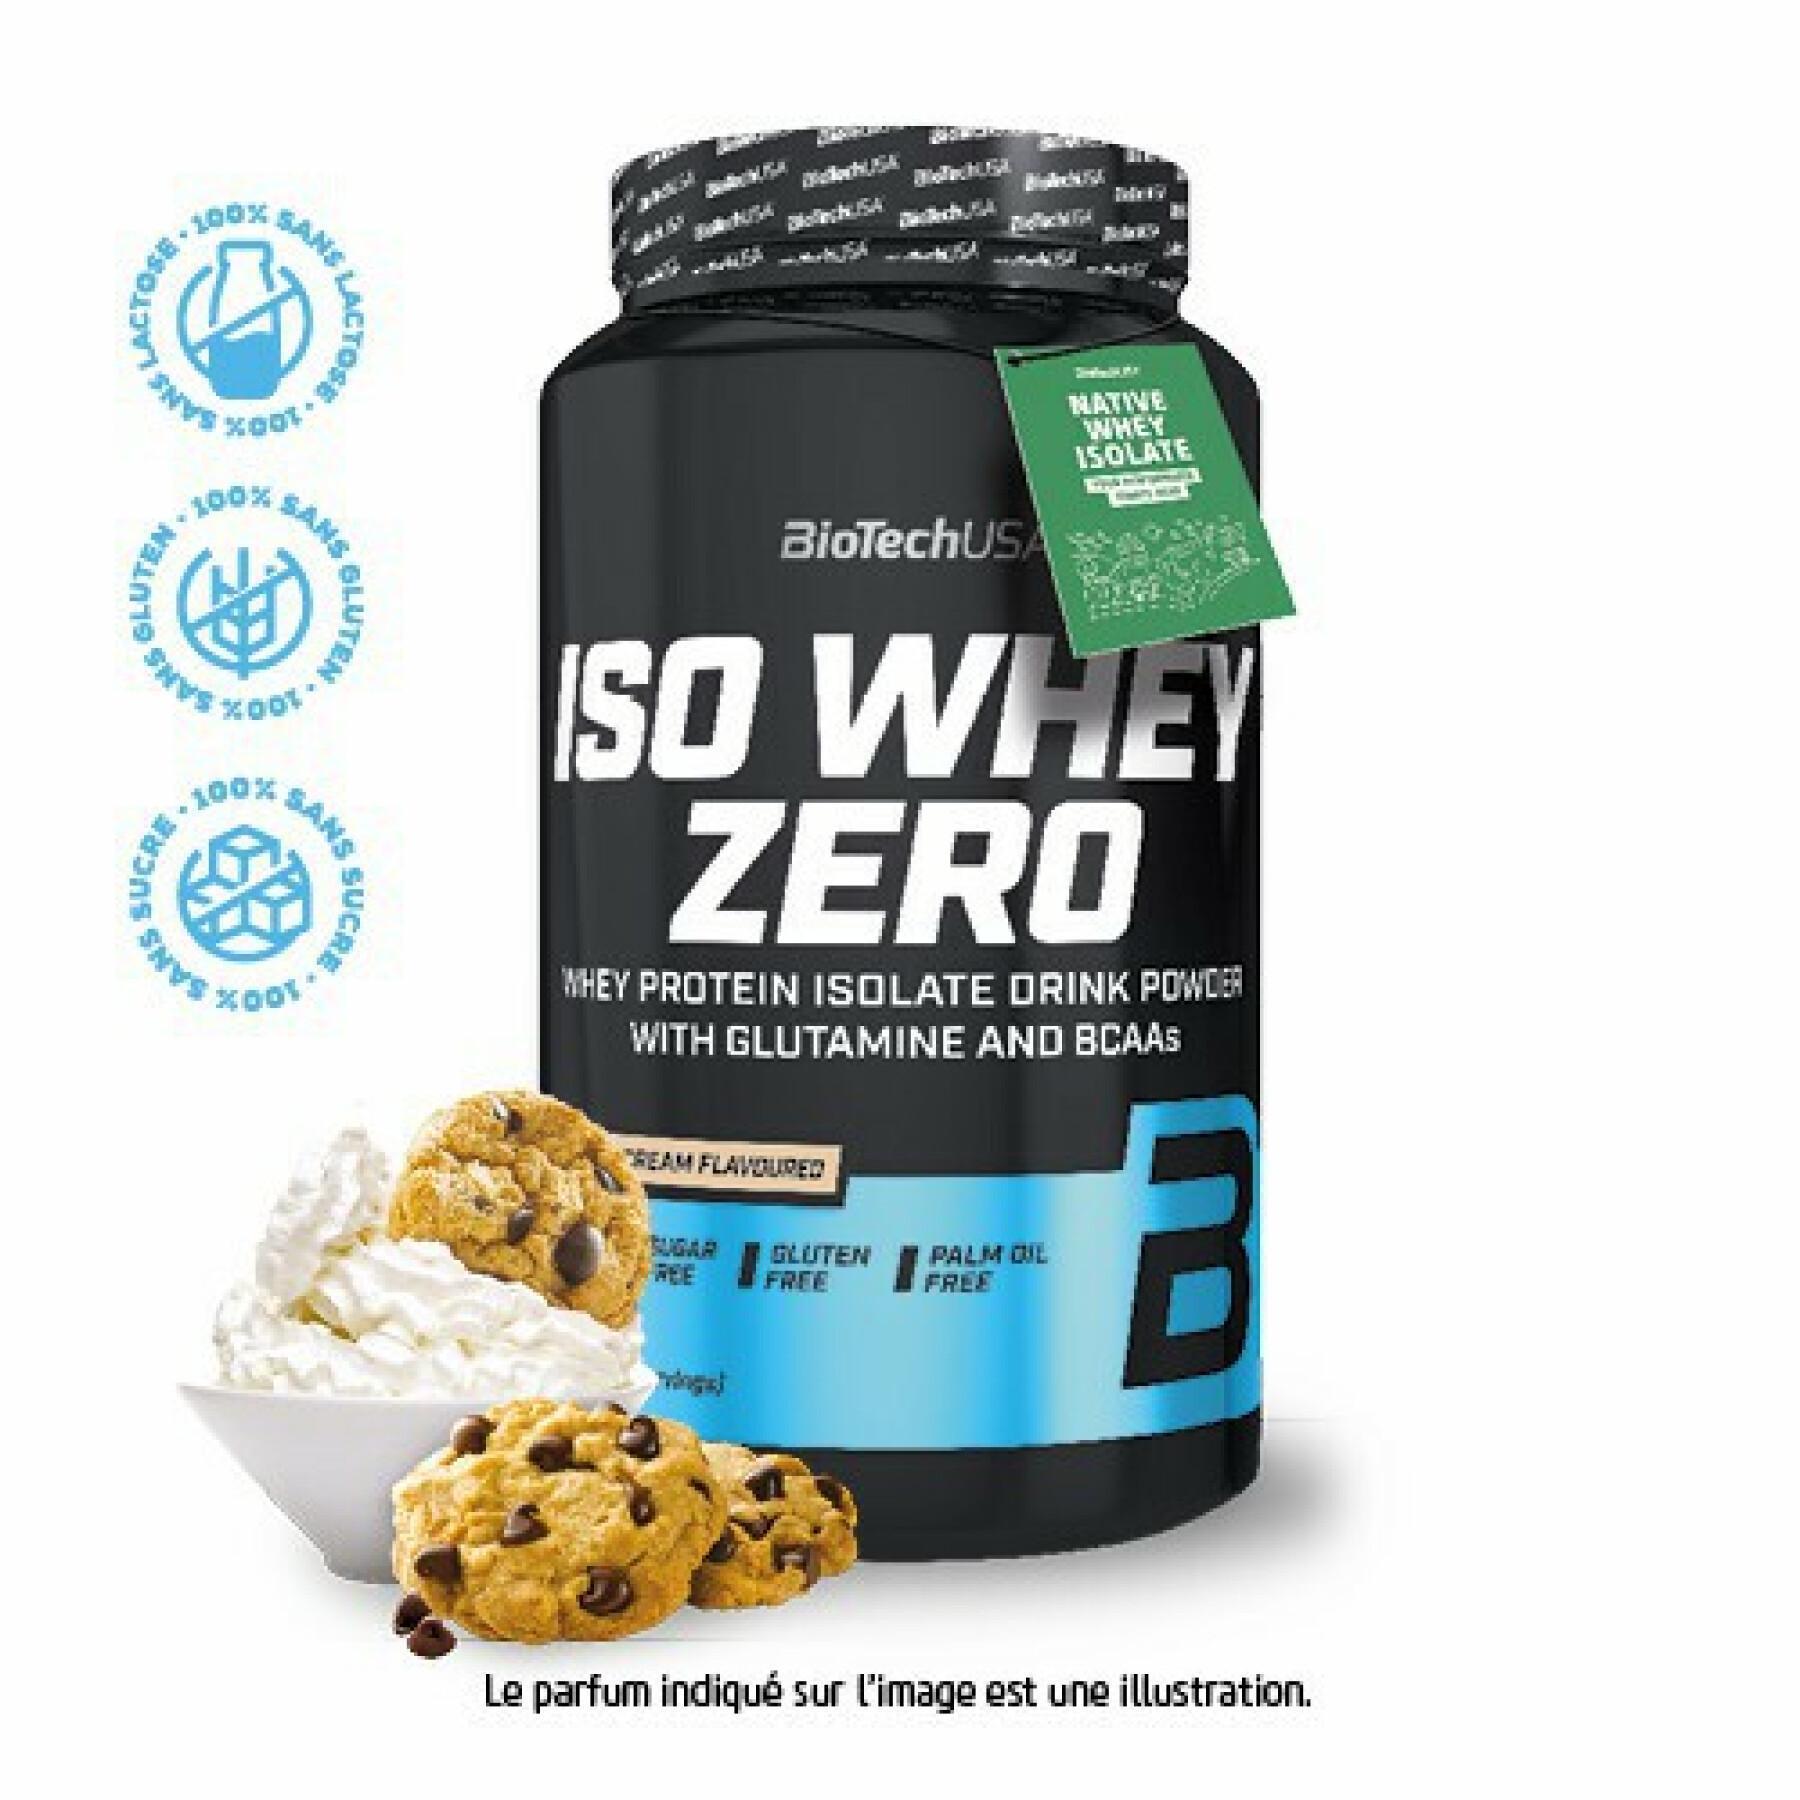 Pack of 6 jars of protein Biotech USA iso whey zero lactose free - Cookies & cream 908g